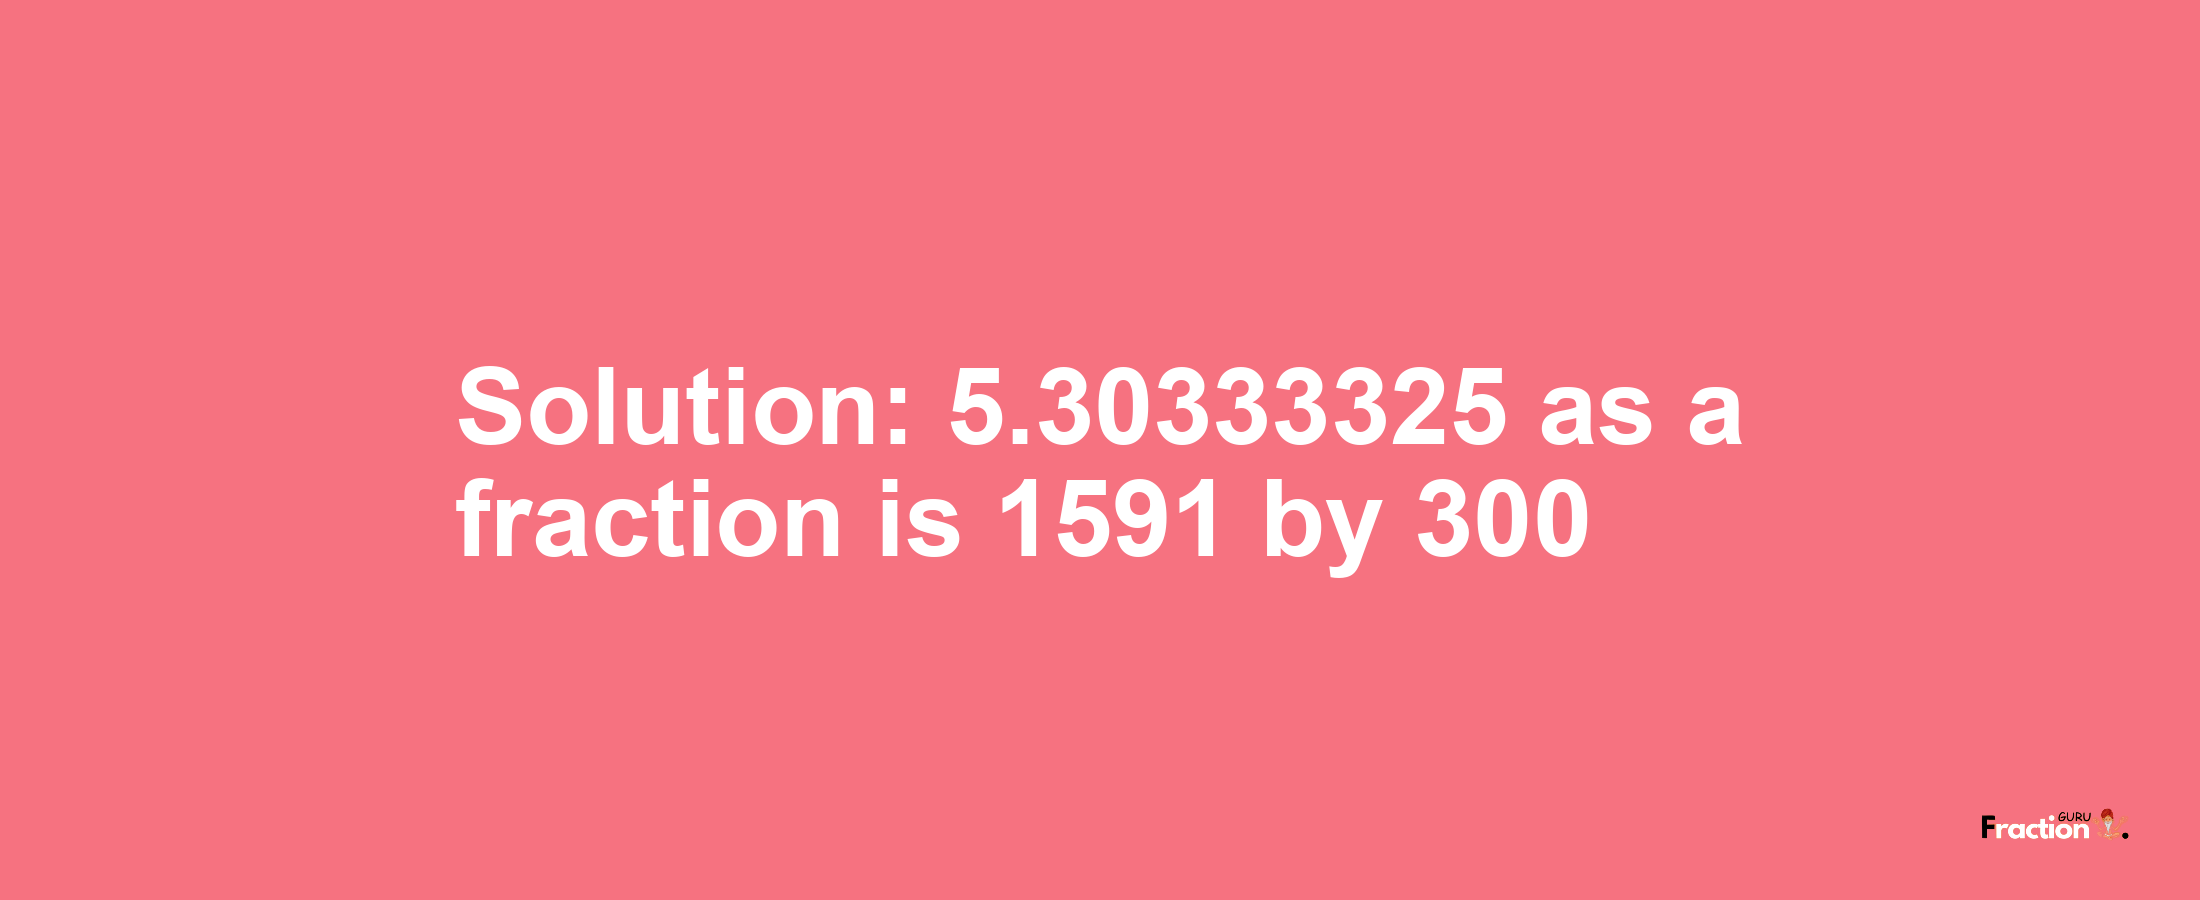 Solution:5.30333325 as a fraction is 1591/300